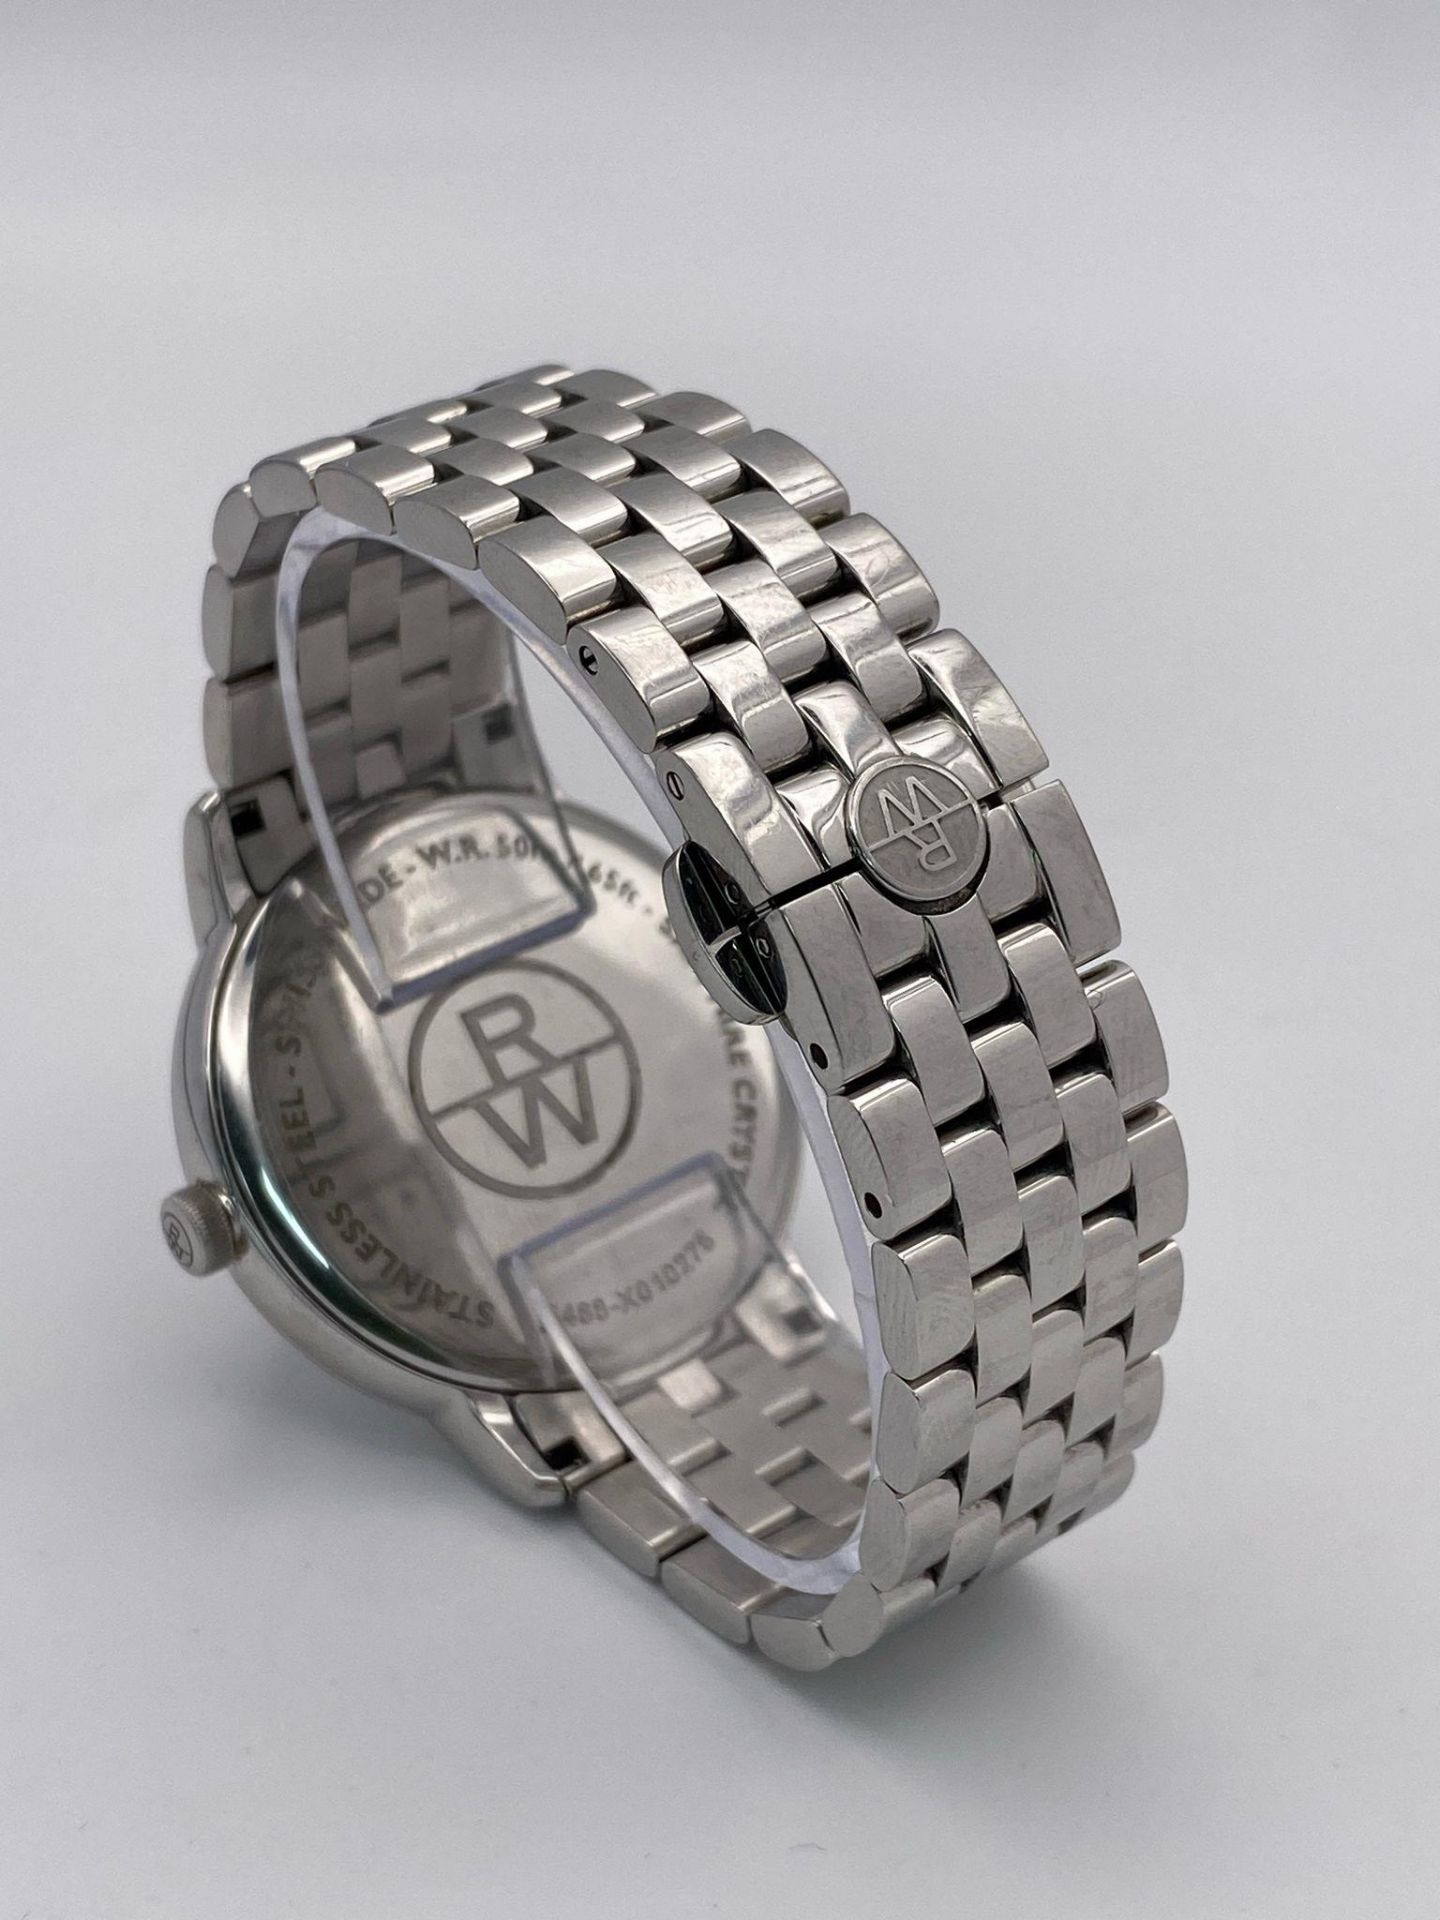 A Classic Raymond Weil Geneve Quartz Gents Watch. Stainless steel bracelet and case - 39mm. Silver - Image 5 of 10